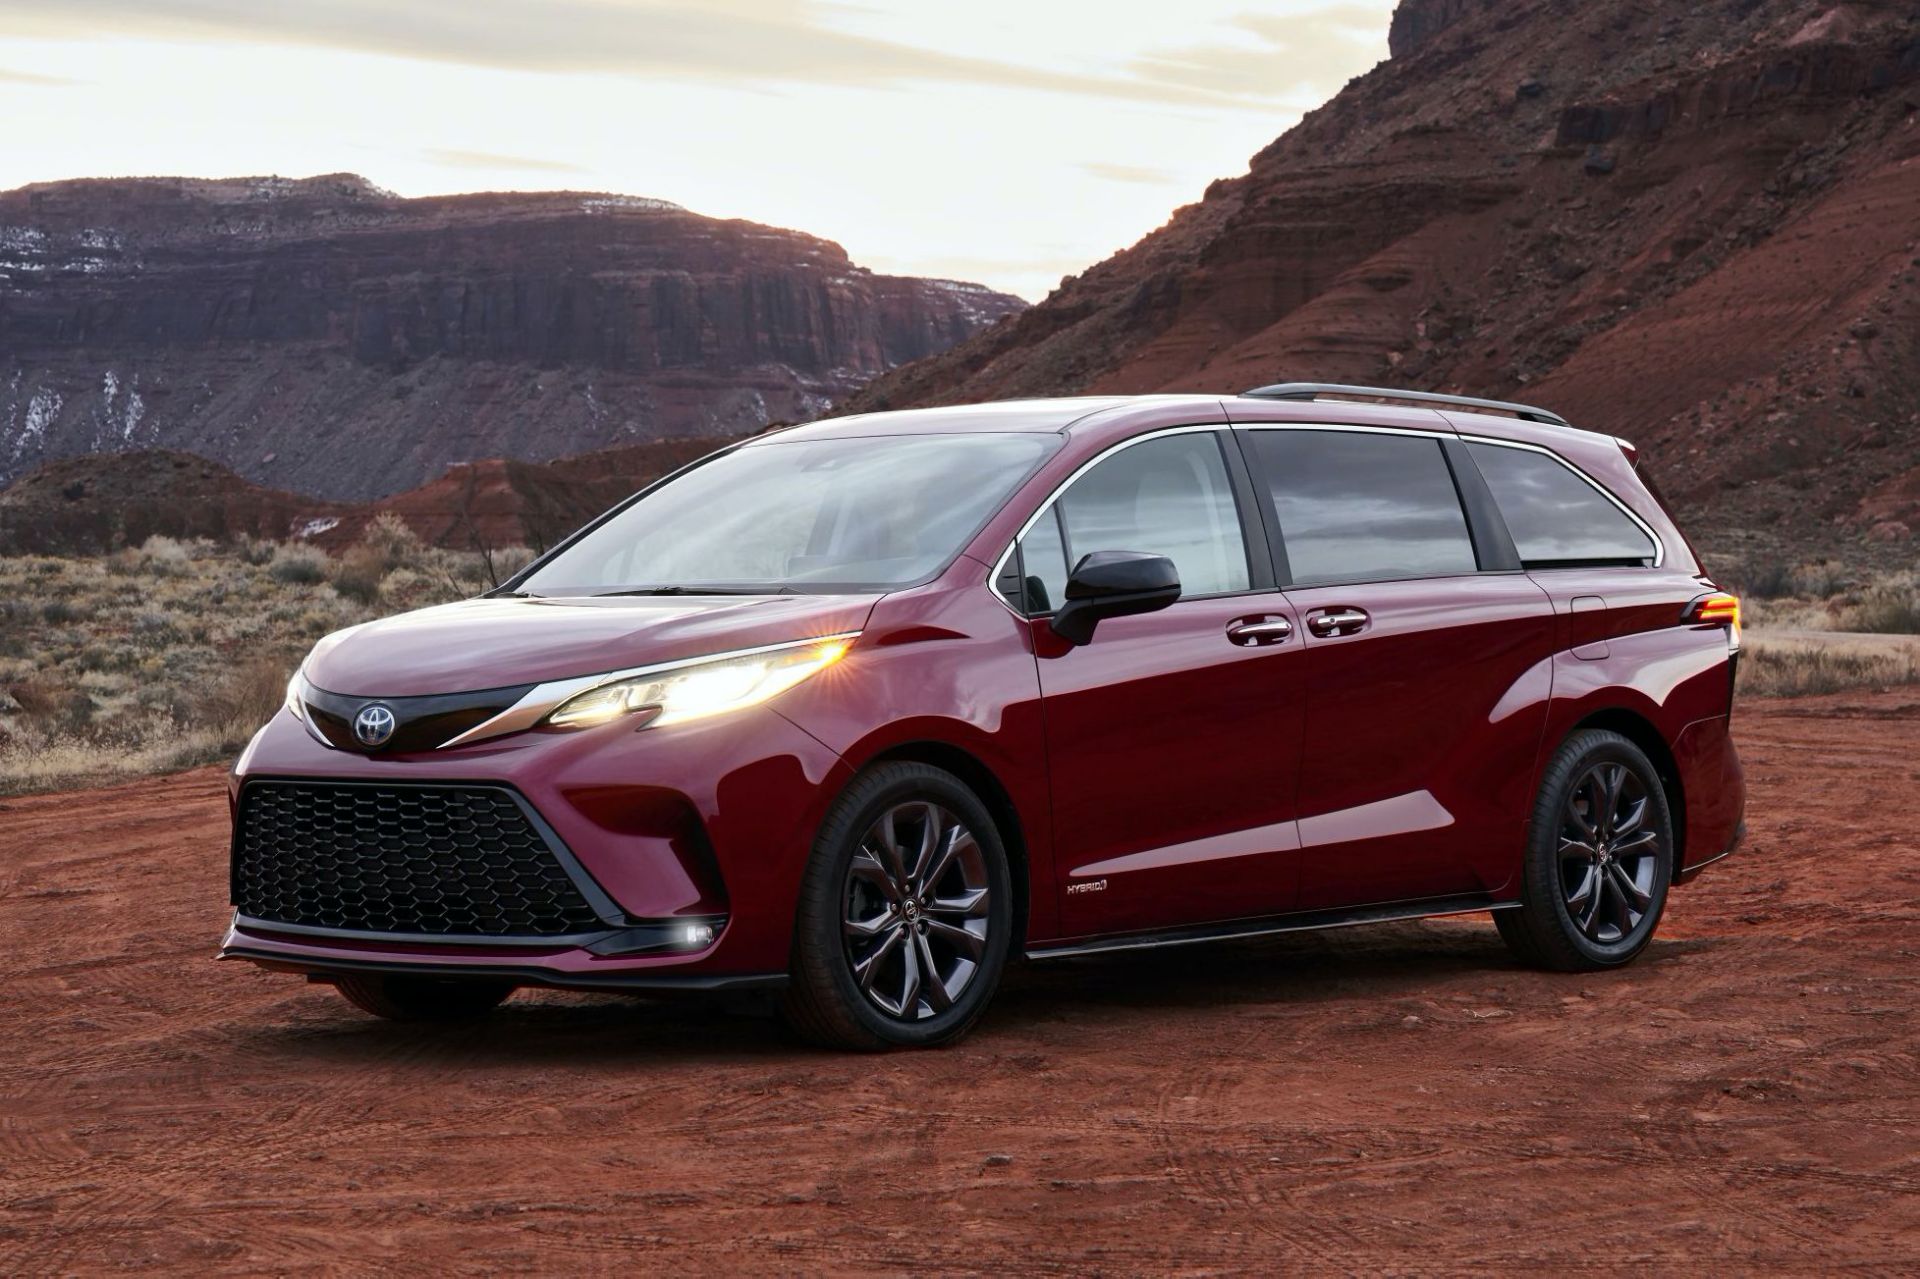 2021 Toyota Sienna Unveiled as Bold New Hybrid Minivan With Available